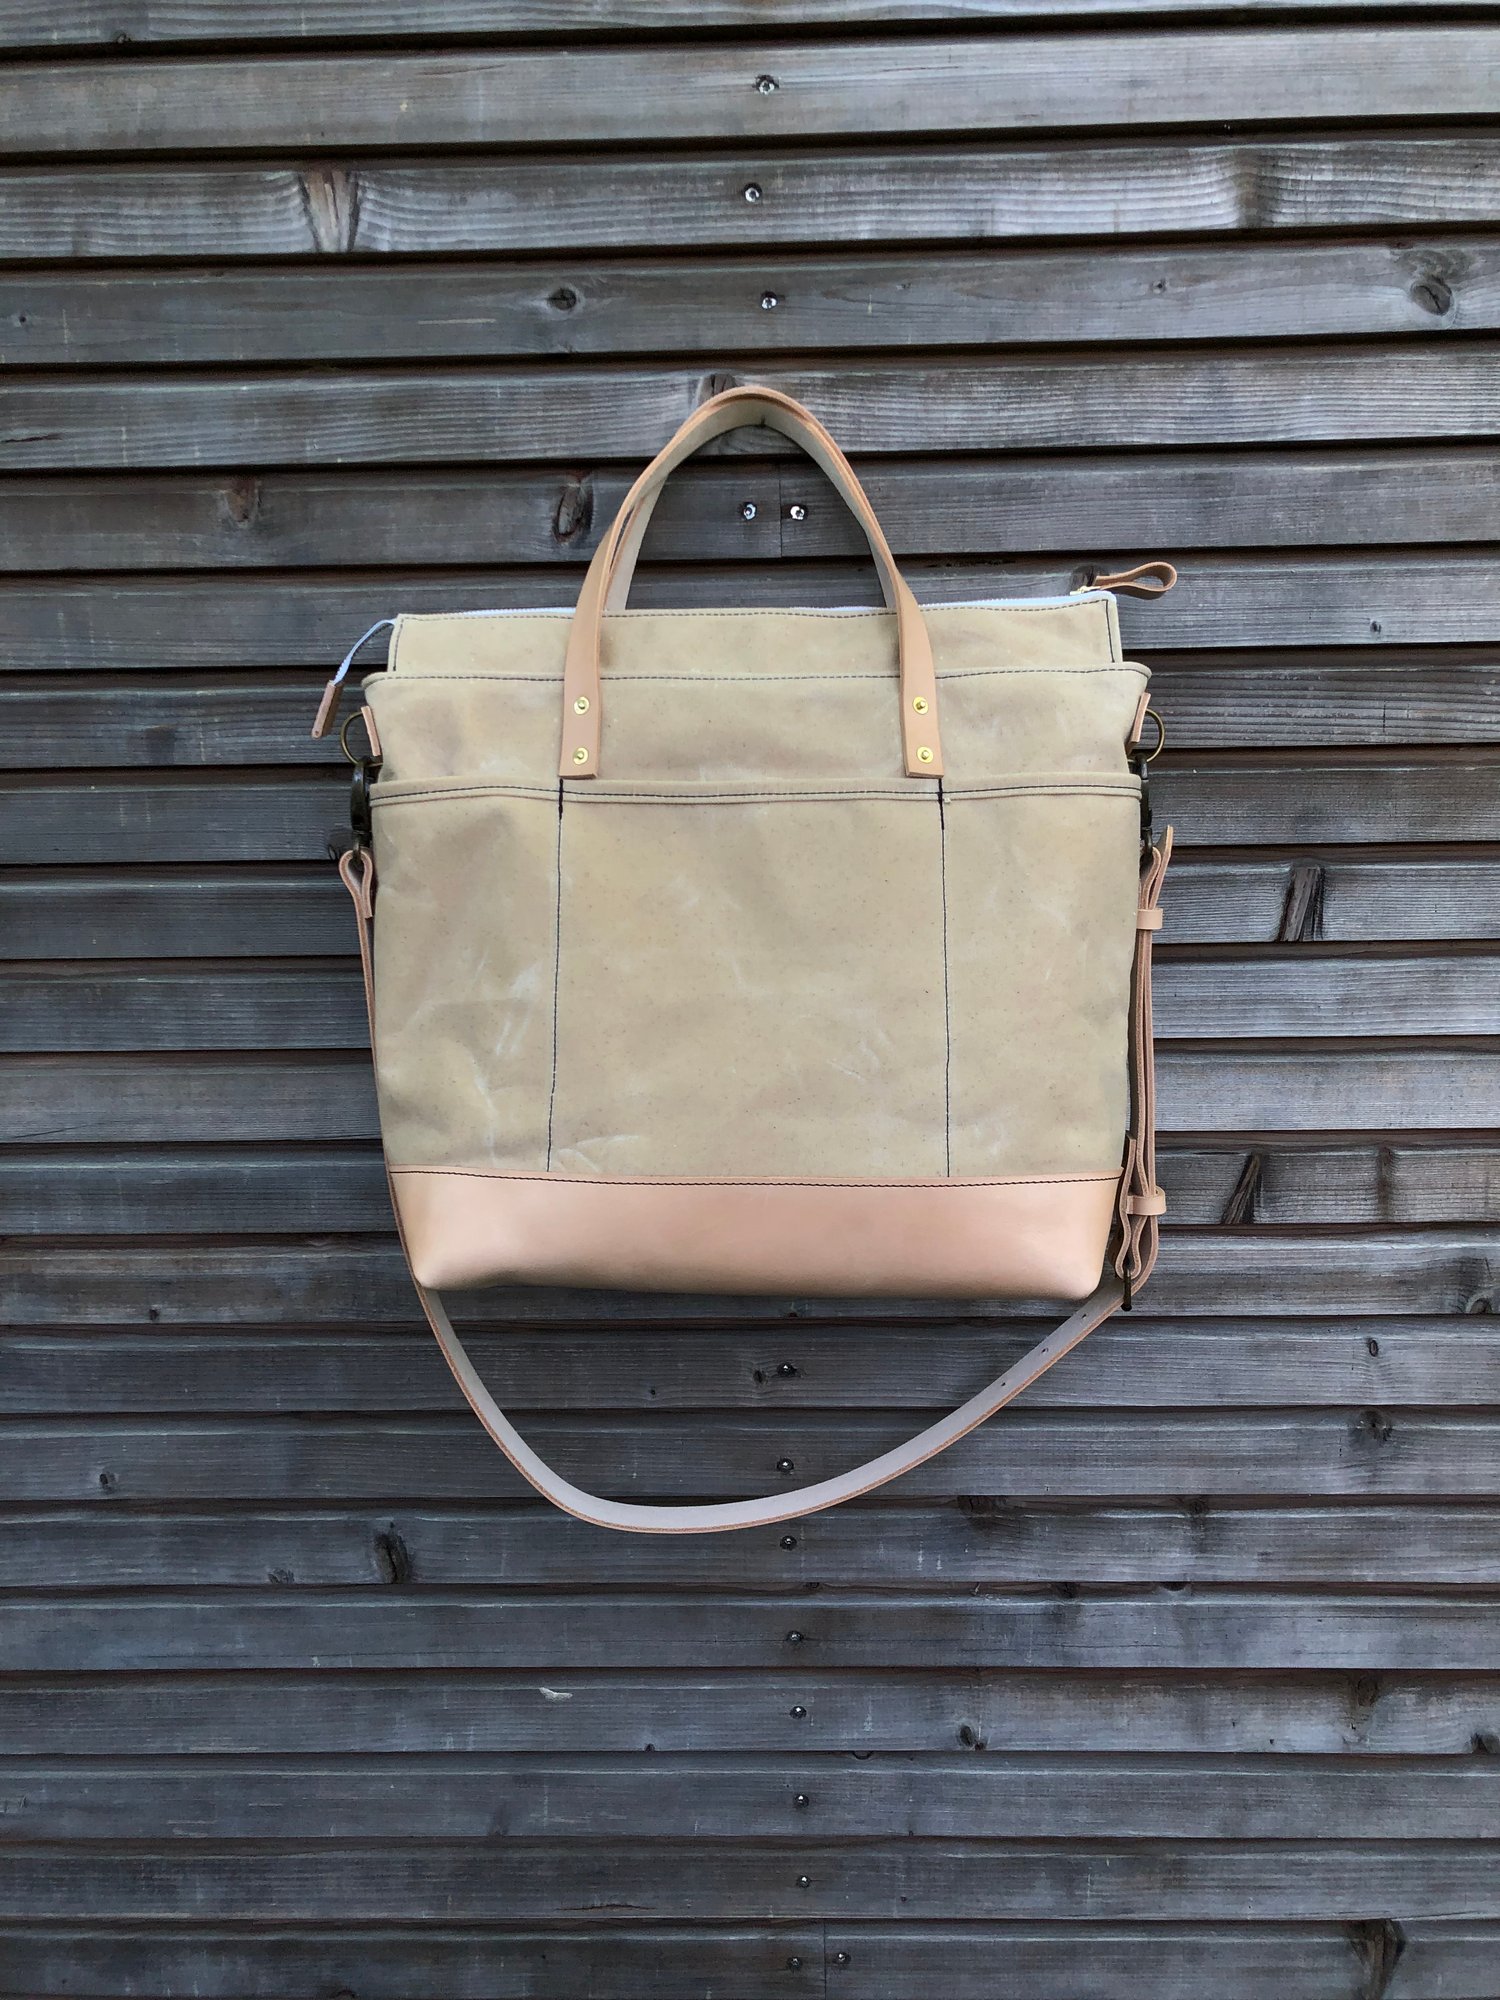 Image of Natural waxed canvas tote bag / office bag with luggage handle attachment leather handles and should